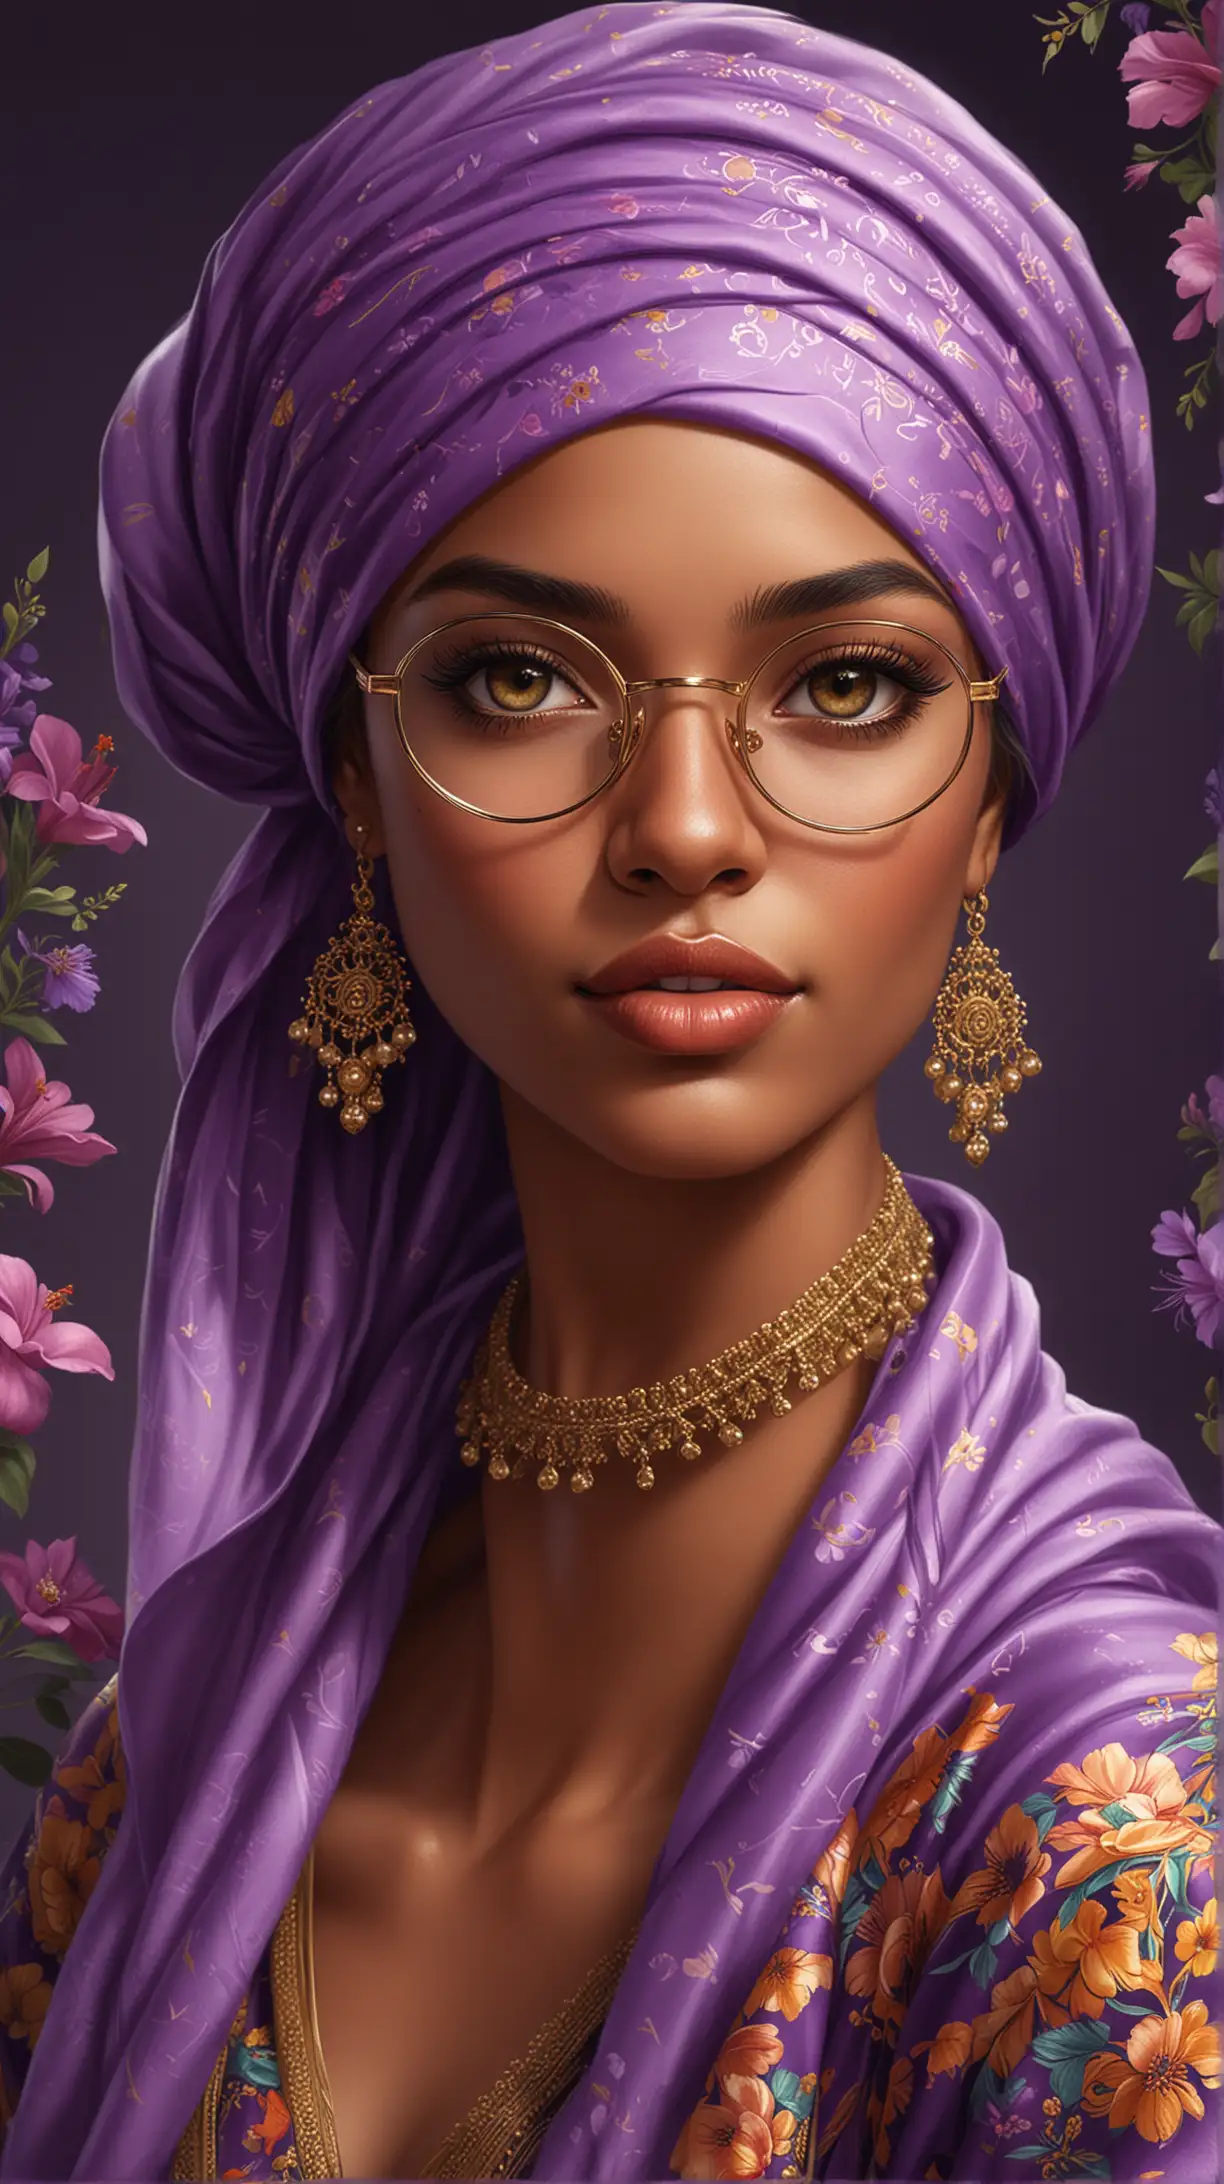 Illustrate a digital art portrait of a female character with a rich ebony complexion that exhudes sophistication and artistry. She should have prominent, striking eyes with long, dramatic eyelashes, and she should be wearing elegant round glasses with a gold frame. Her hair shoul be styled in a vibrant headscarf lavishly adorned with colouful and elaborate floral patterns, including large purple blooms. The character should be neutral and simple to ensure the focus remains on the character, and there should be no text included in the image. The image should have the aesthetic of an art prompt guide cover, embodying a blend of modern and classical elegance.